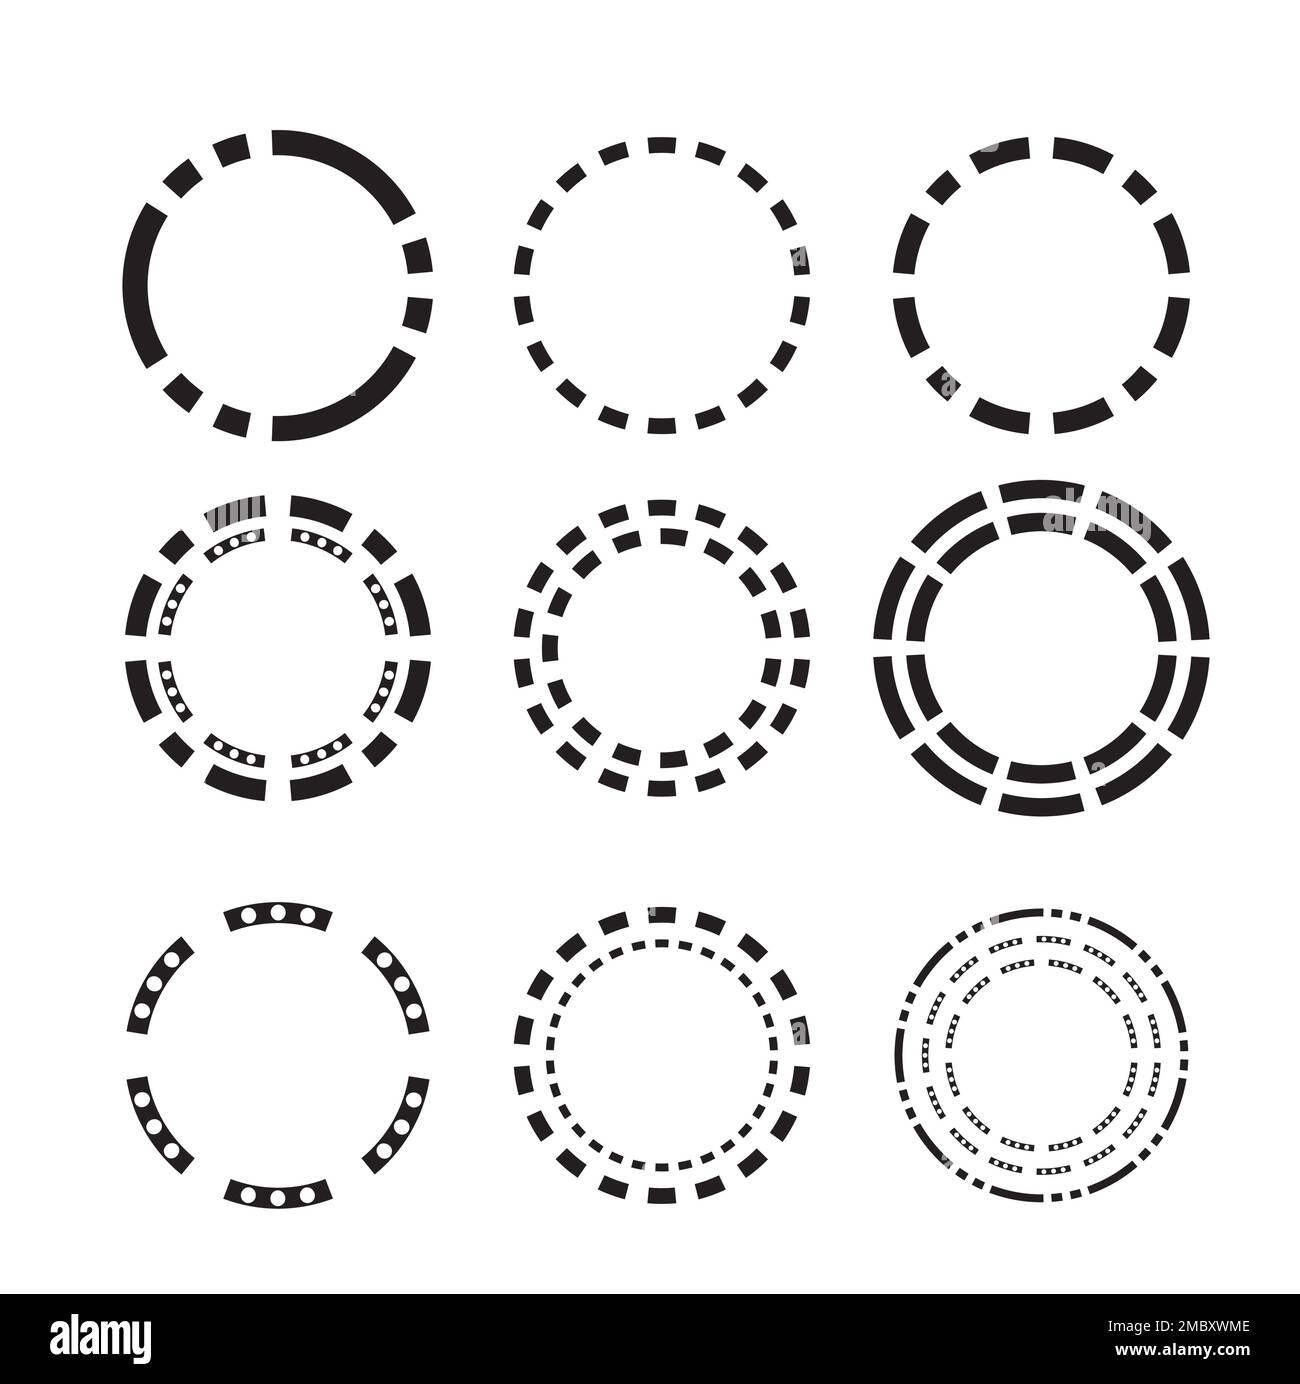 Circle Shaped Dotted Stroke In Black Color Stock Vector